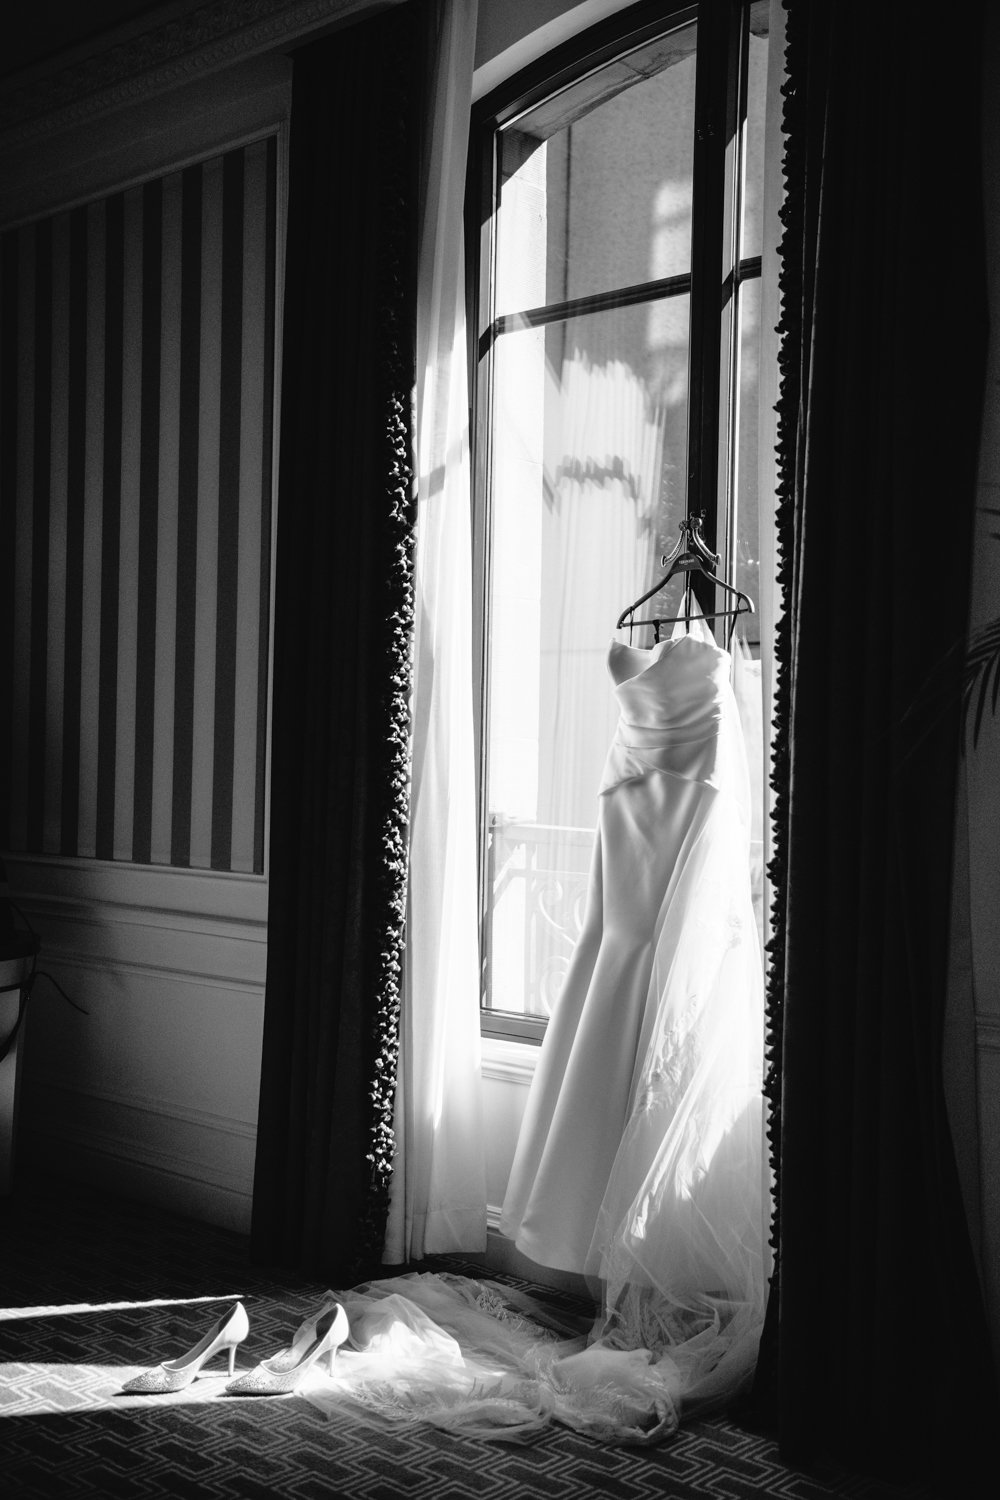 Strapless wedding gown hangs against a tall window as the light shines through into the room.

Manhattan Luxury Wedding. New York Luxury Wedding Photographer. Wedding in Manhattan. NYC Luxury Wedding.